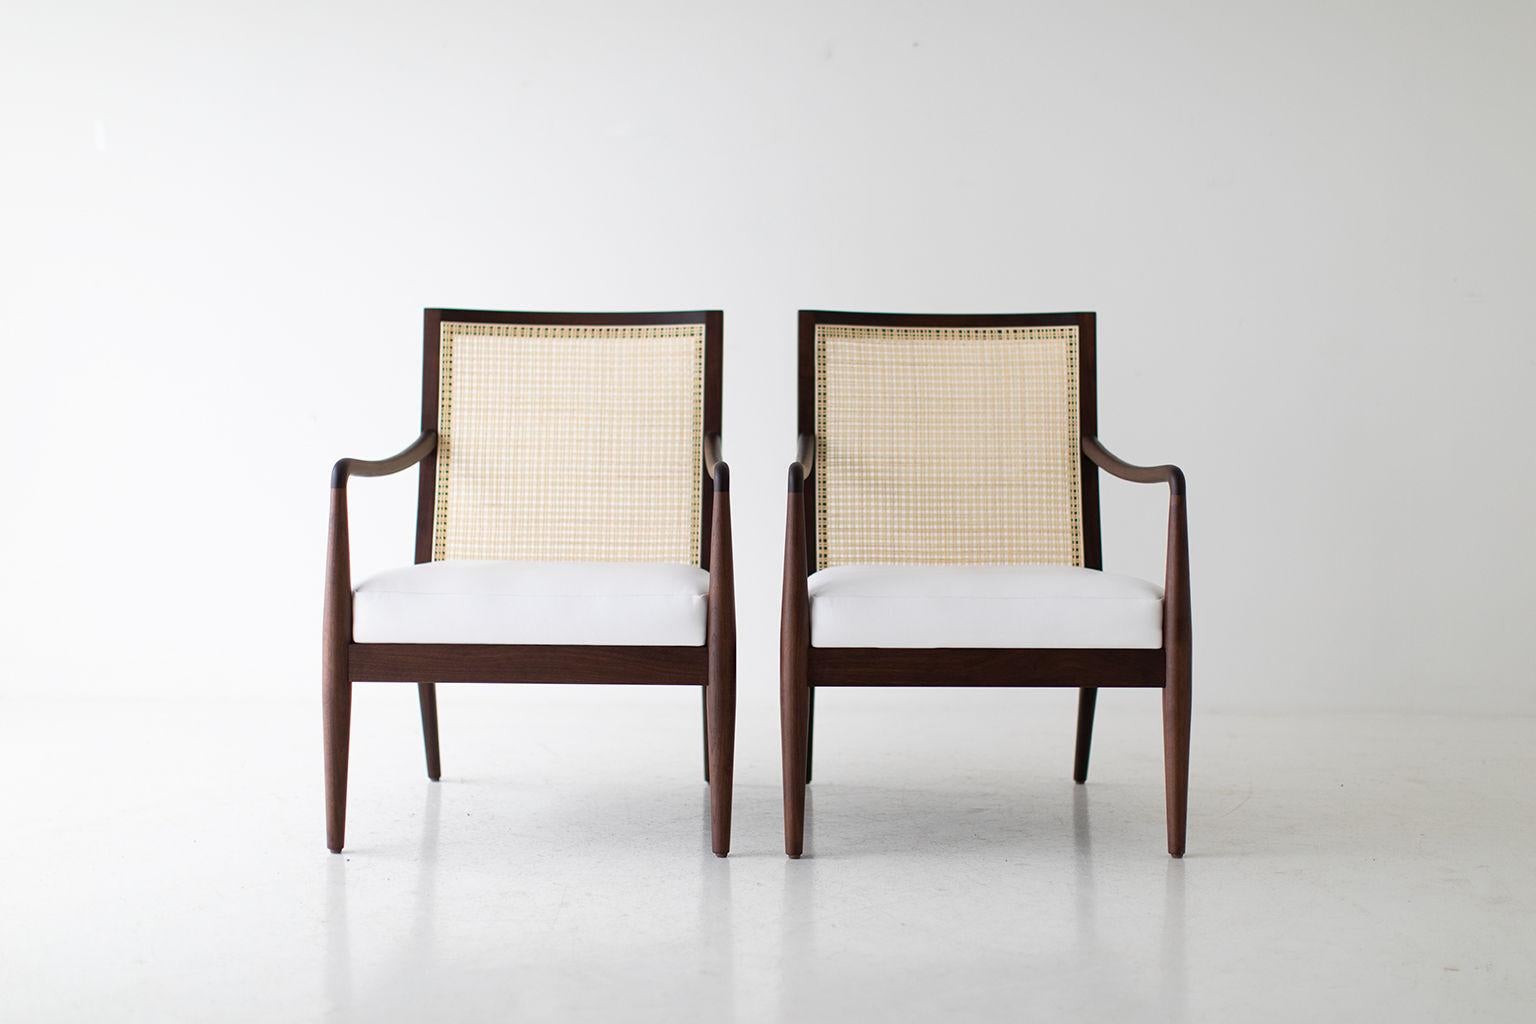 CraftAssociates Armchairs, Peabody Modern Cane Back Armchairs, Walnut, Caneback

These Lawrence Peabody modern cane back arm chairs for Craft Associates Furniture are expertly handcrafted and upholstered. These Peabody chairs are a licensed